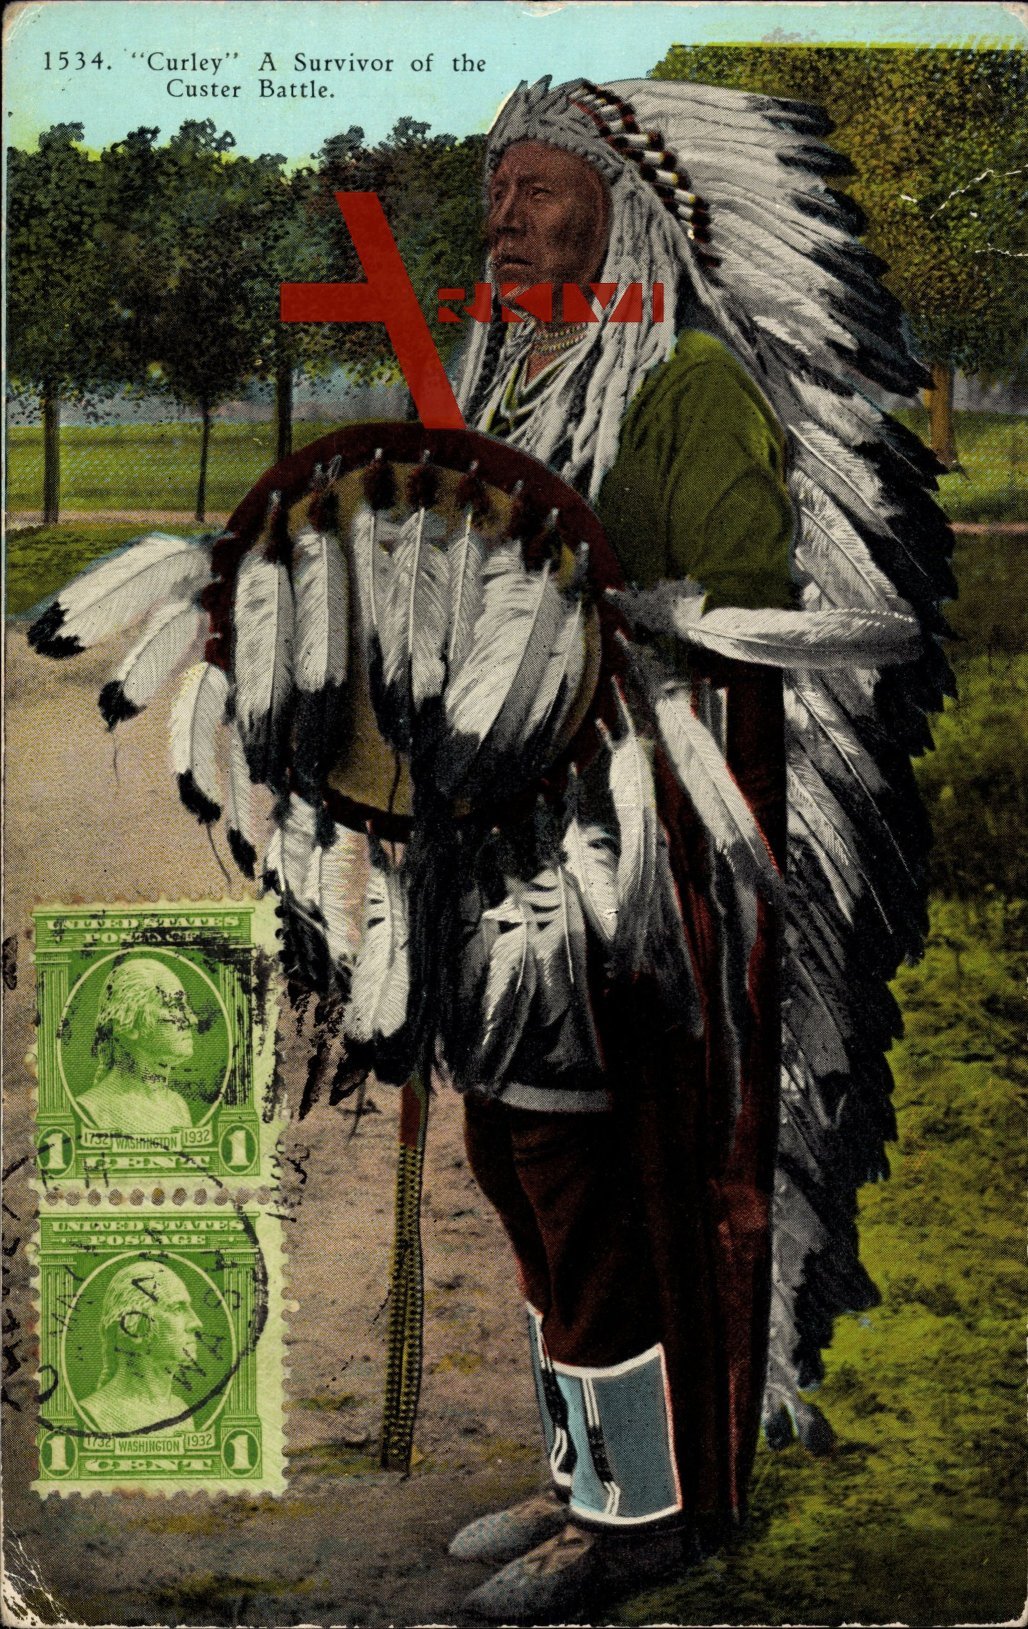 Indianer, Curley, A Survivor of the George Armstrong Custer Battle